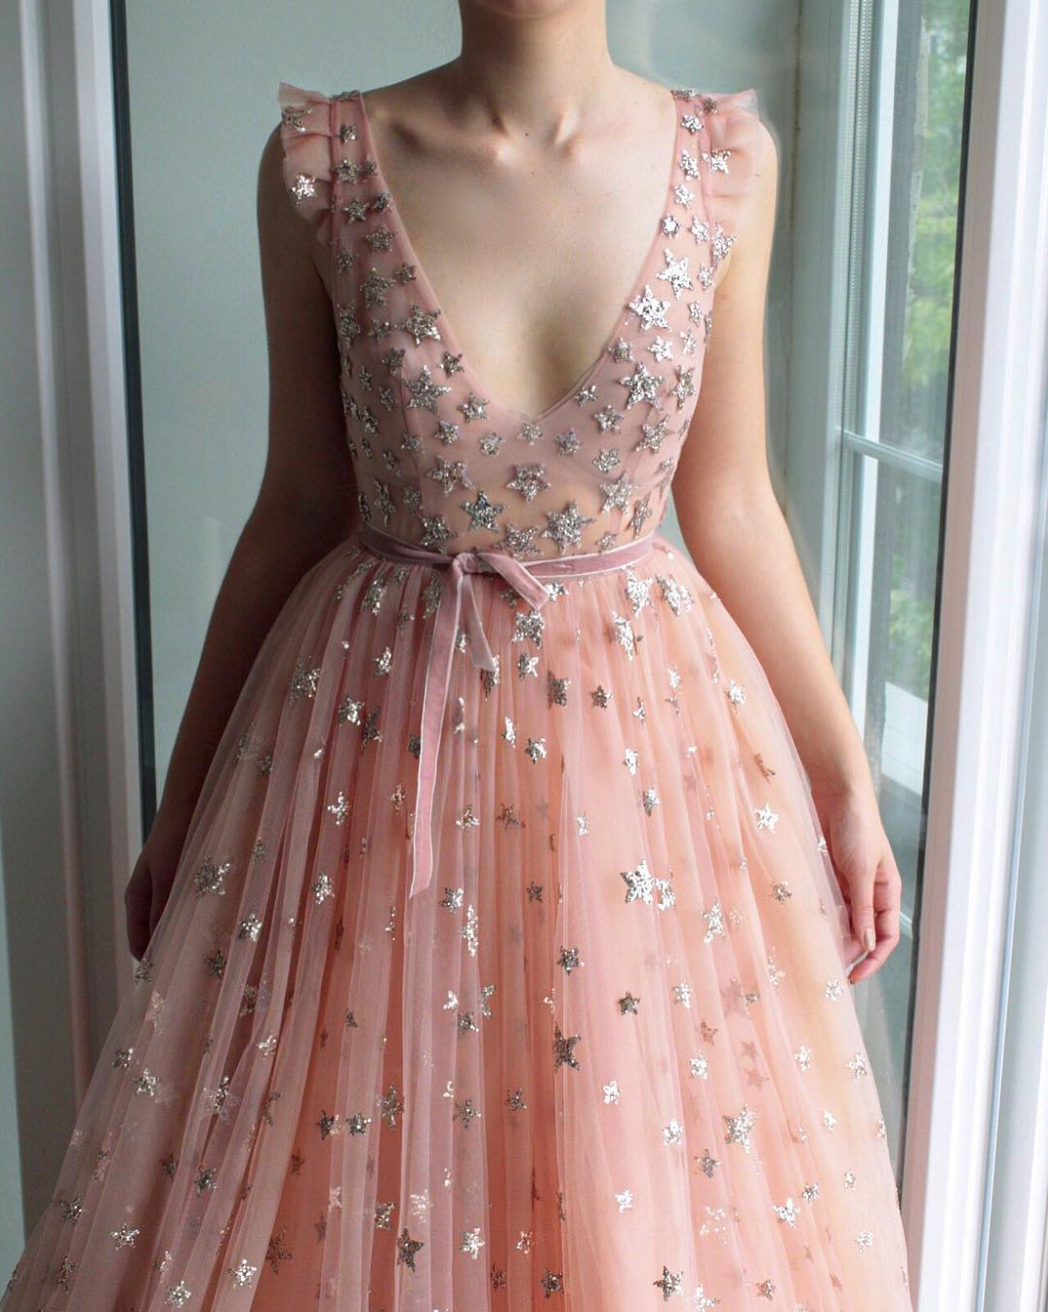 Pink A-Line dress with no sleeves, v-neck and starry fabric